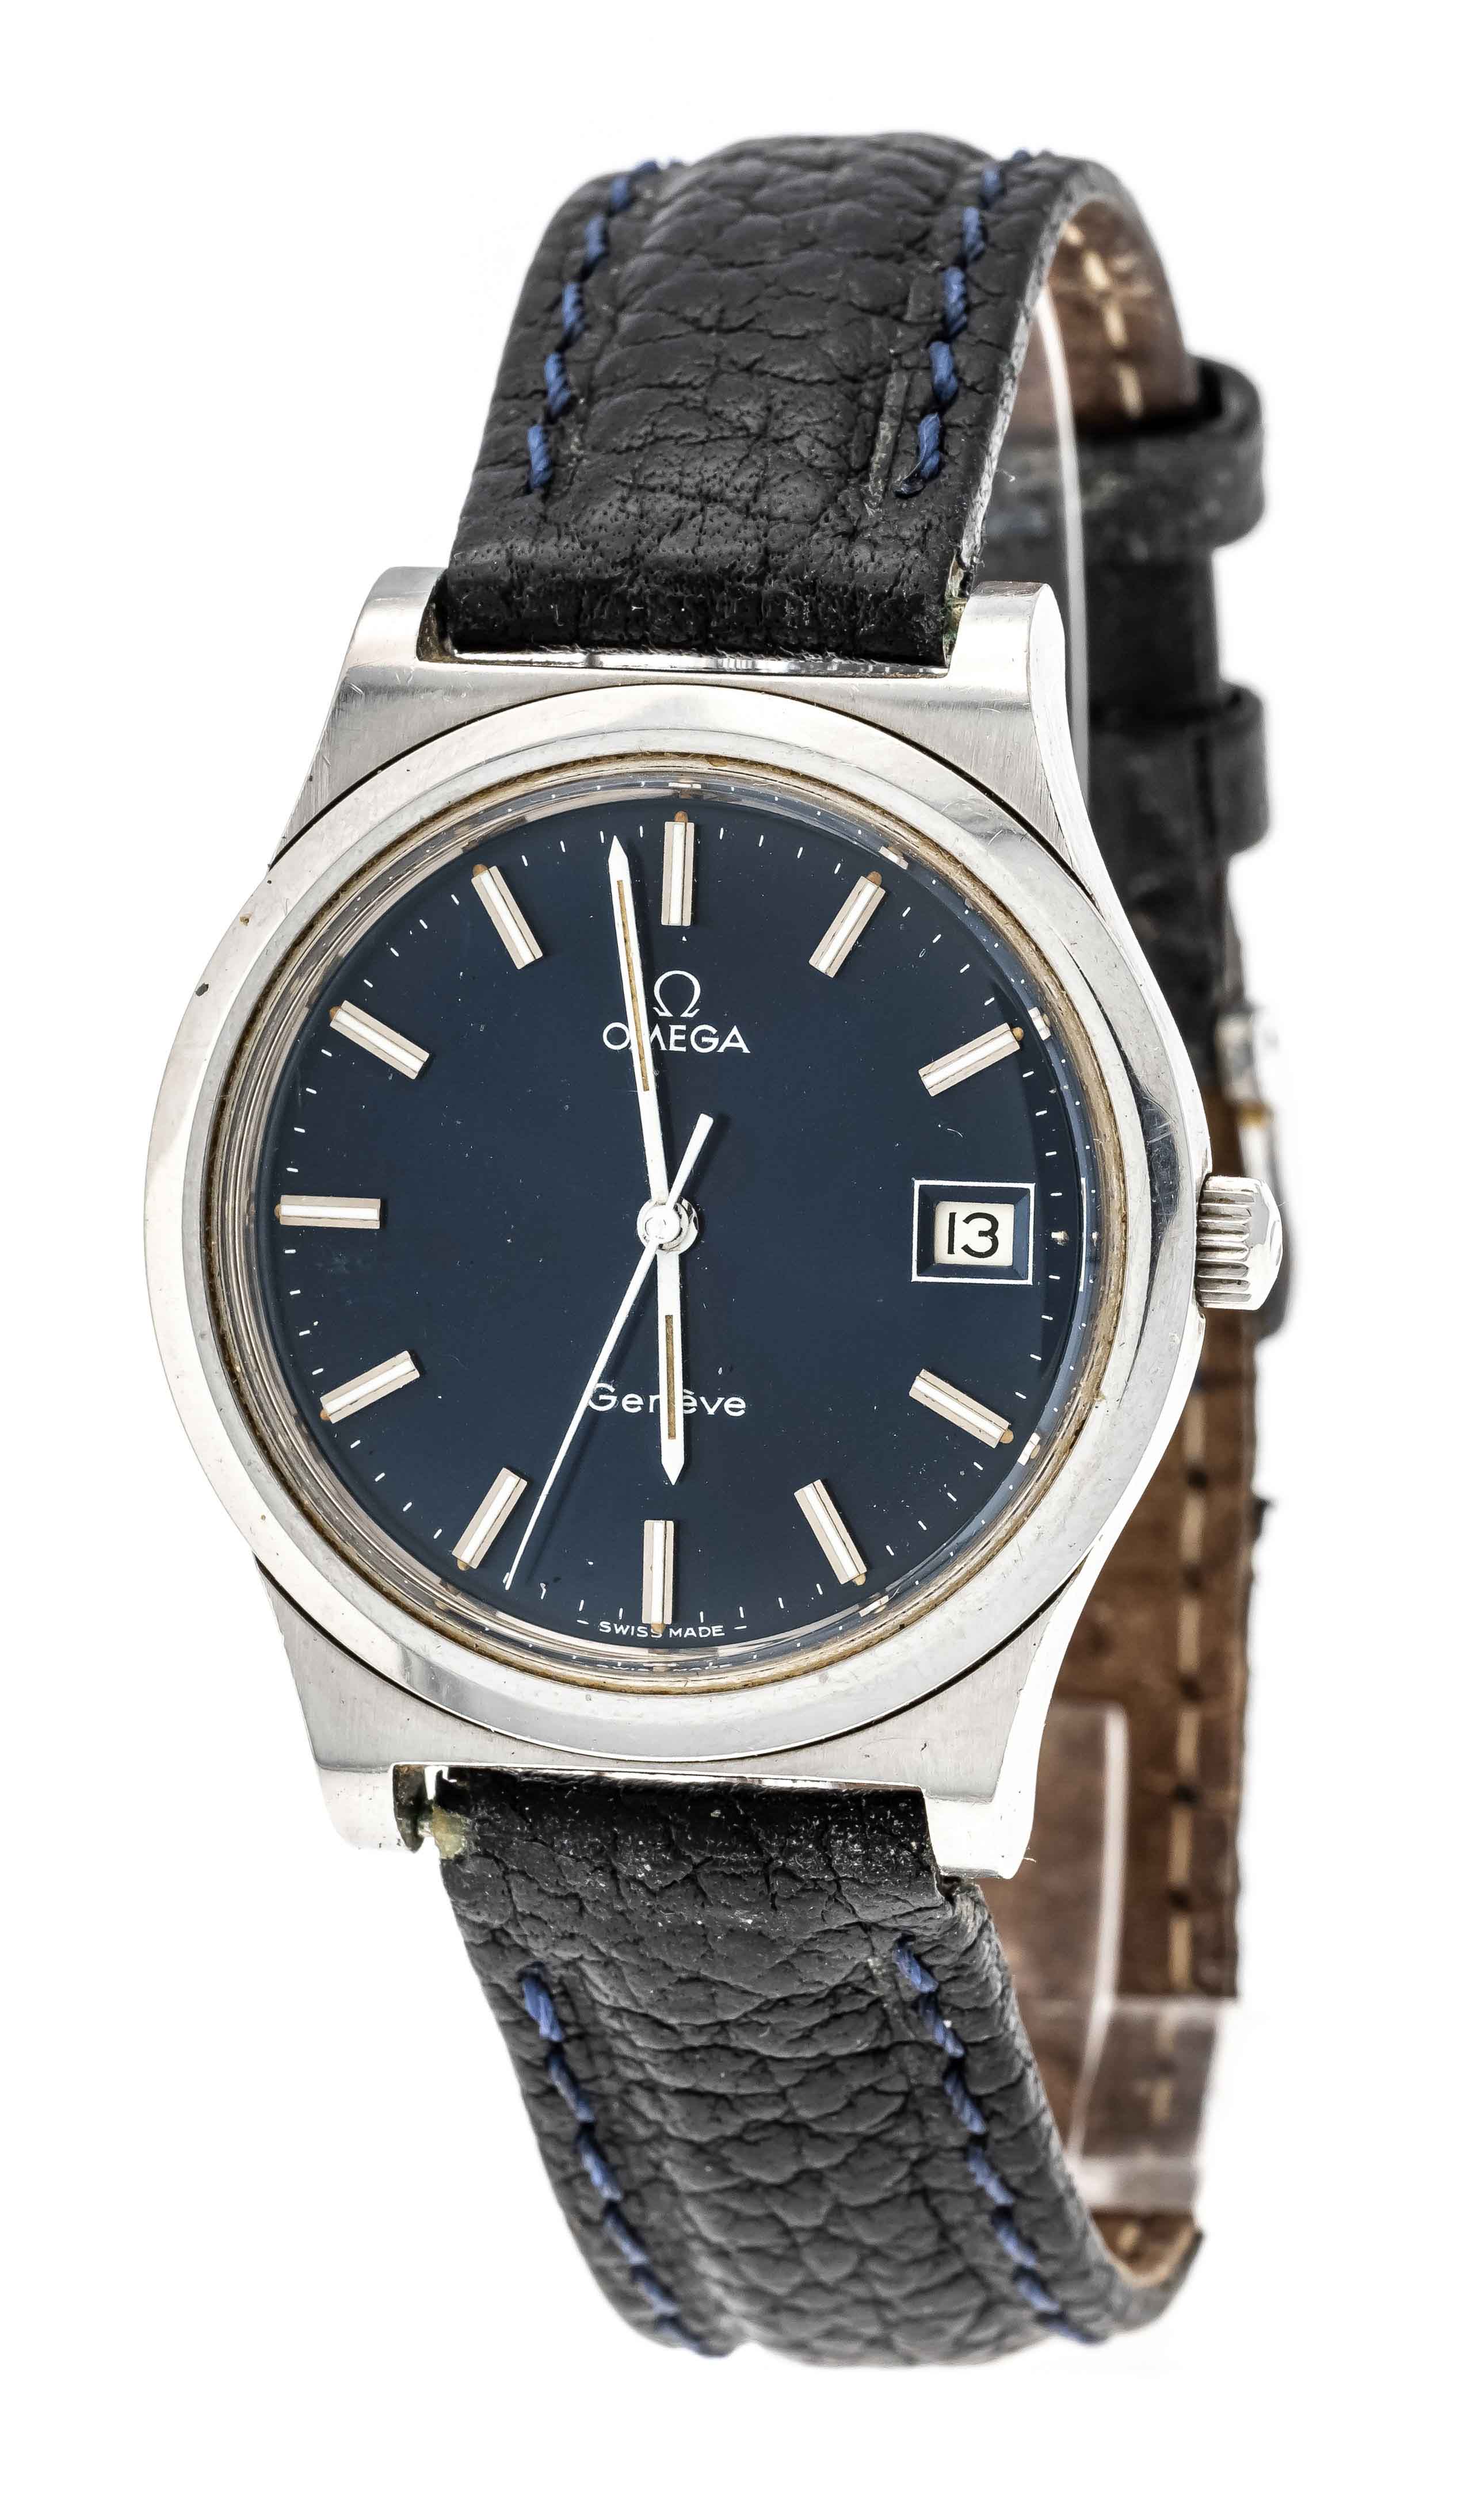 Omega men's watch manual winding, Ref. 136.0102, steel case, movement Cal. 1030 runs exactly, blue - Image 2 of 9